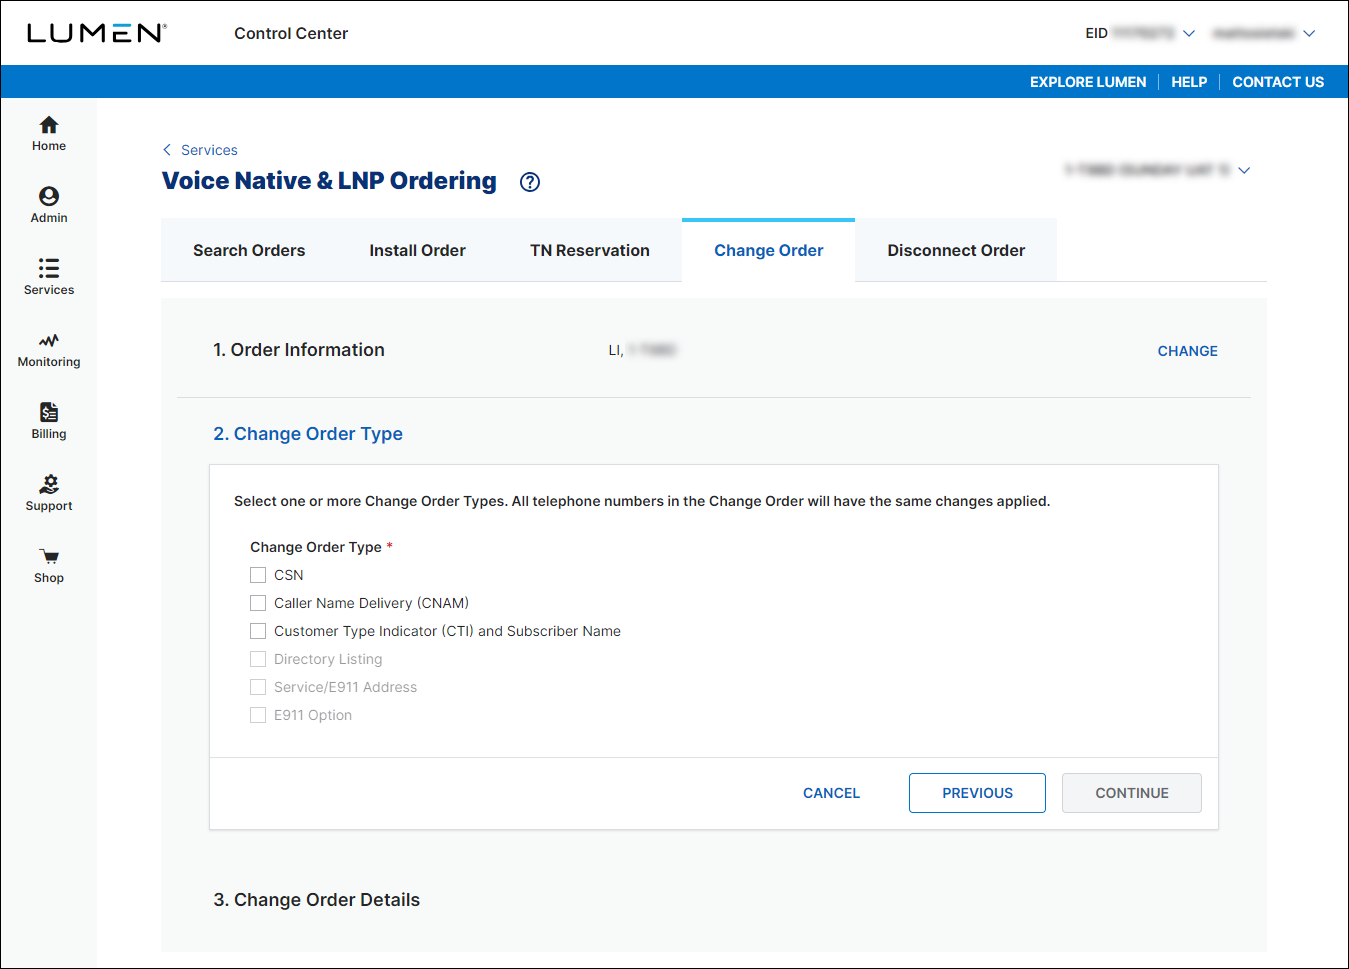 Voice Native & LNP Ordering (showing Change Order tab and Change Order Type section for LI)